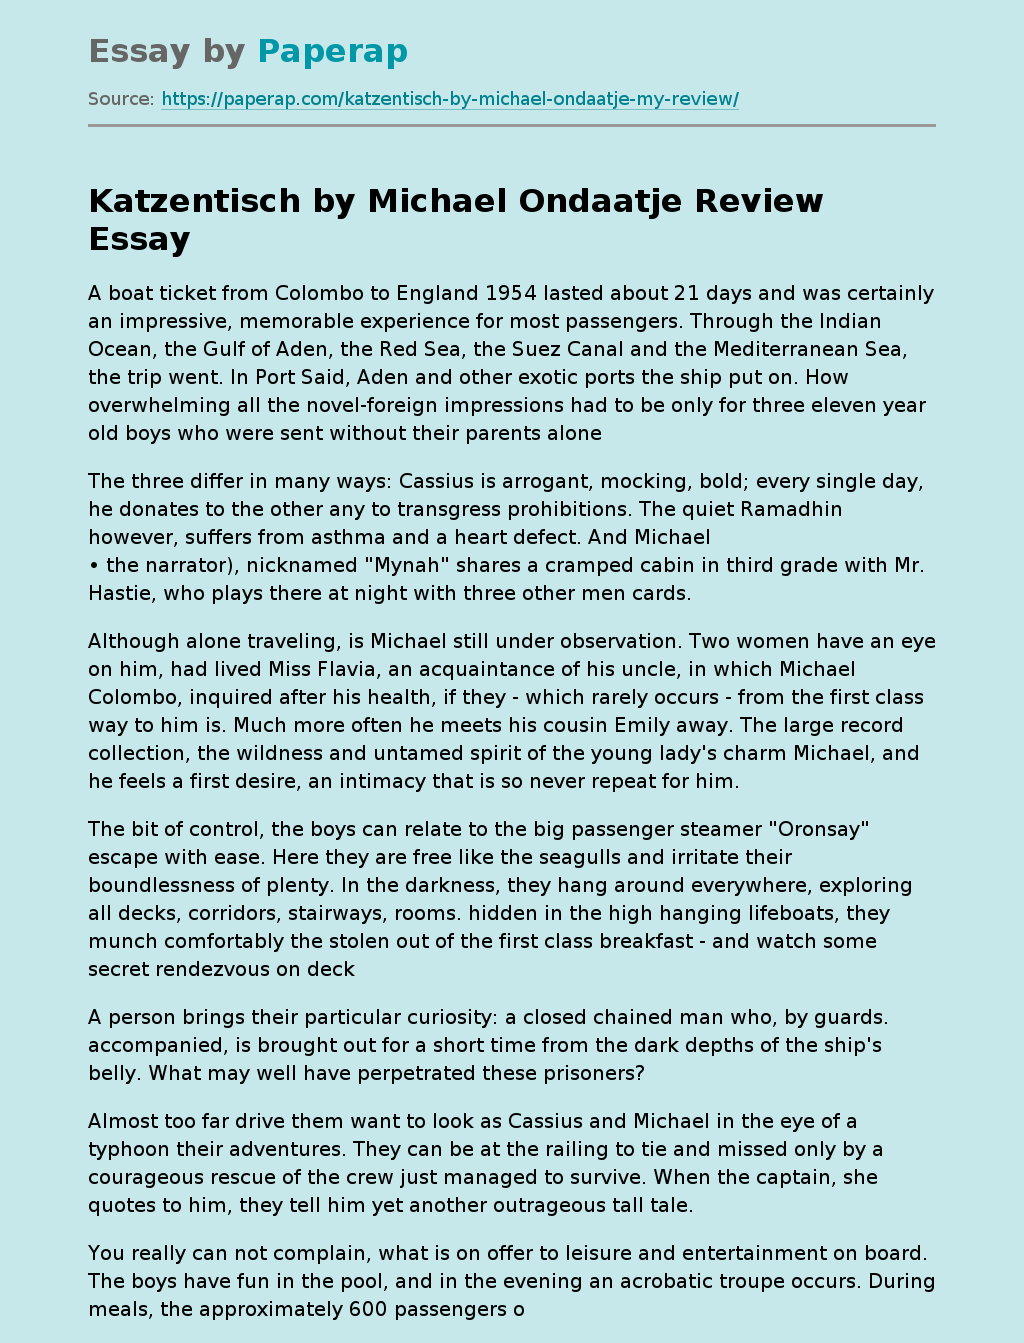 “Cat Table” by Michael Ondaatje